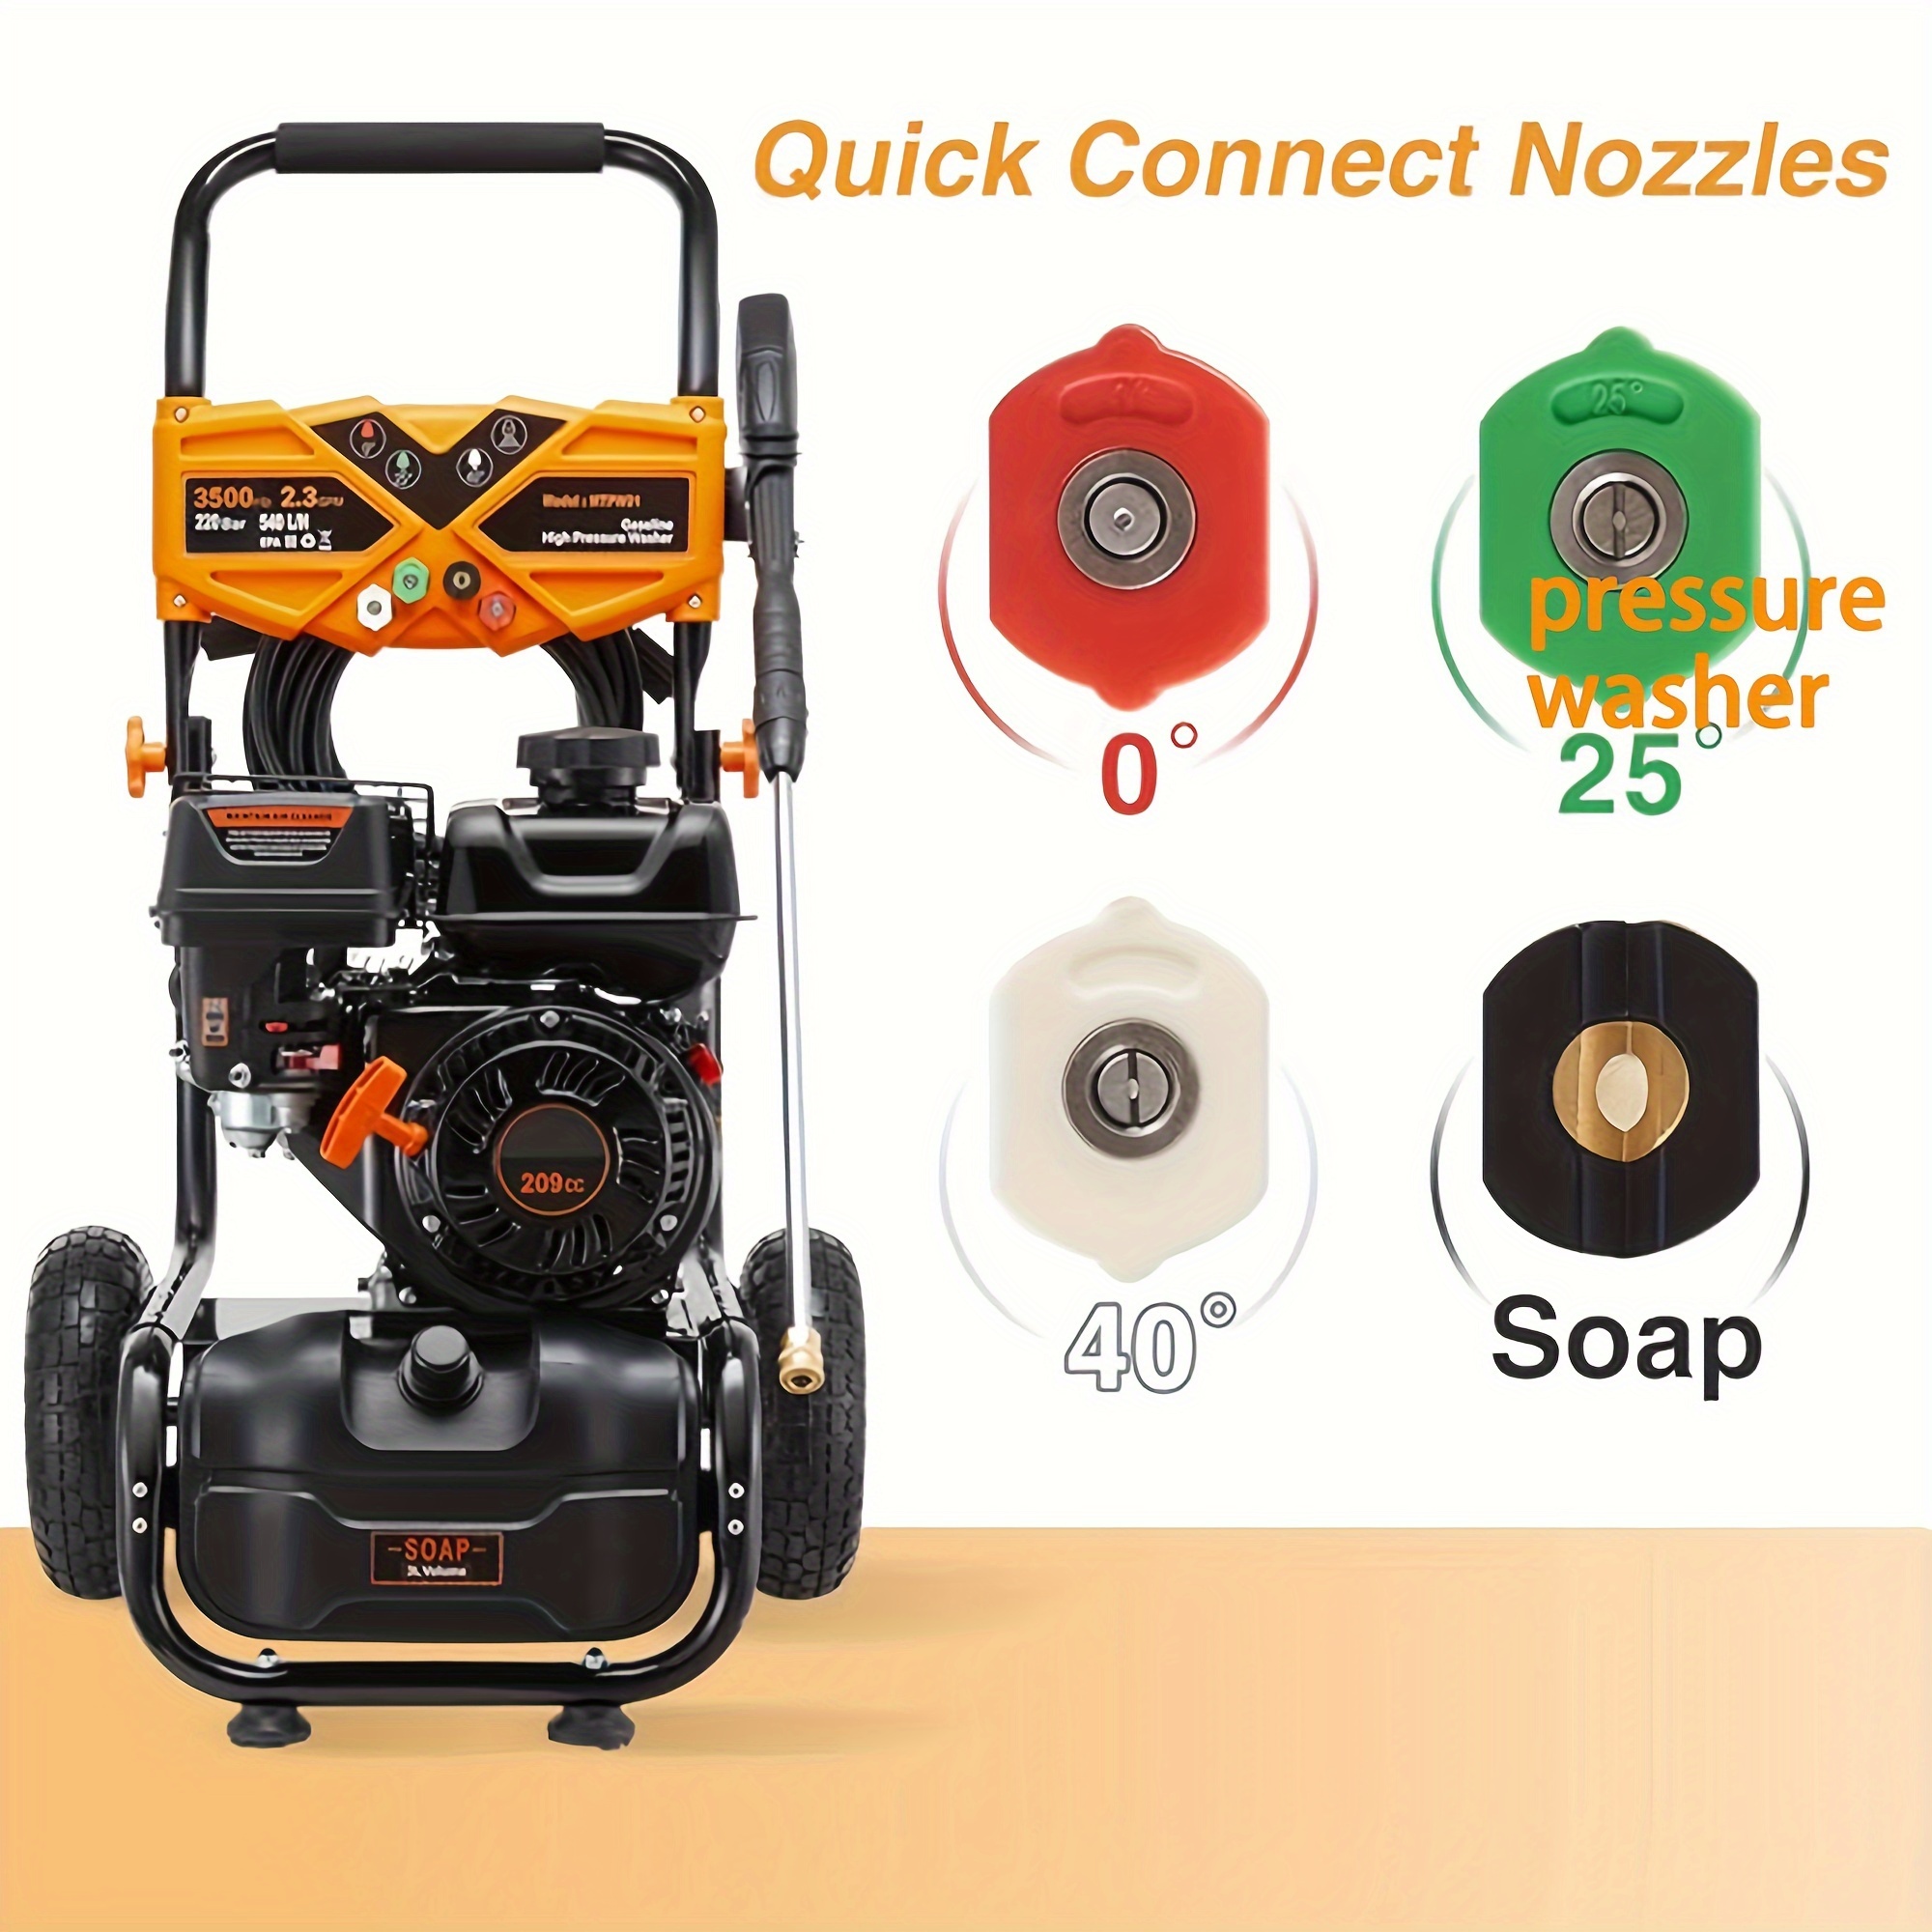 

Mutaomay Gas Pressure Washer, 3500 Max Psi And 2.3 Max Gpm, Brushless Motor, Onboard Soap Tank, Spray Gun And Wand, 5 Nozzle Set, For Cars/fences/driveways/homes/patios/furniture